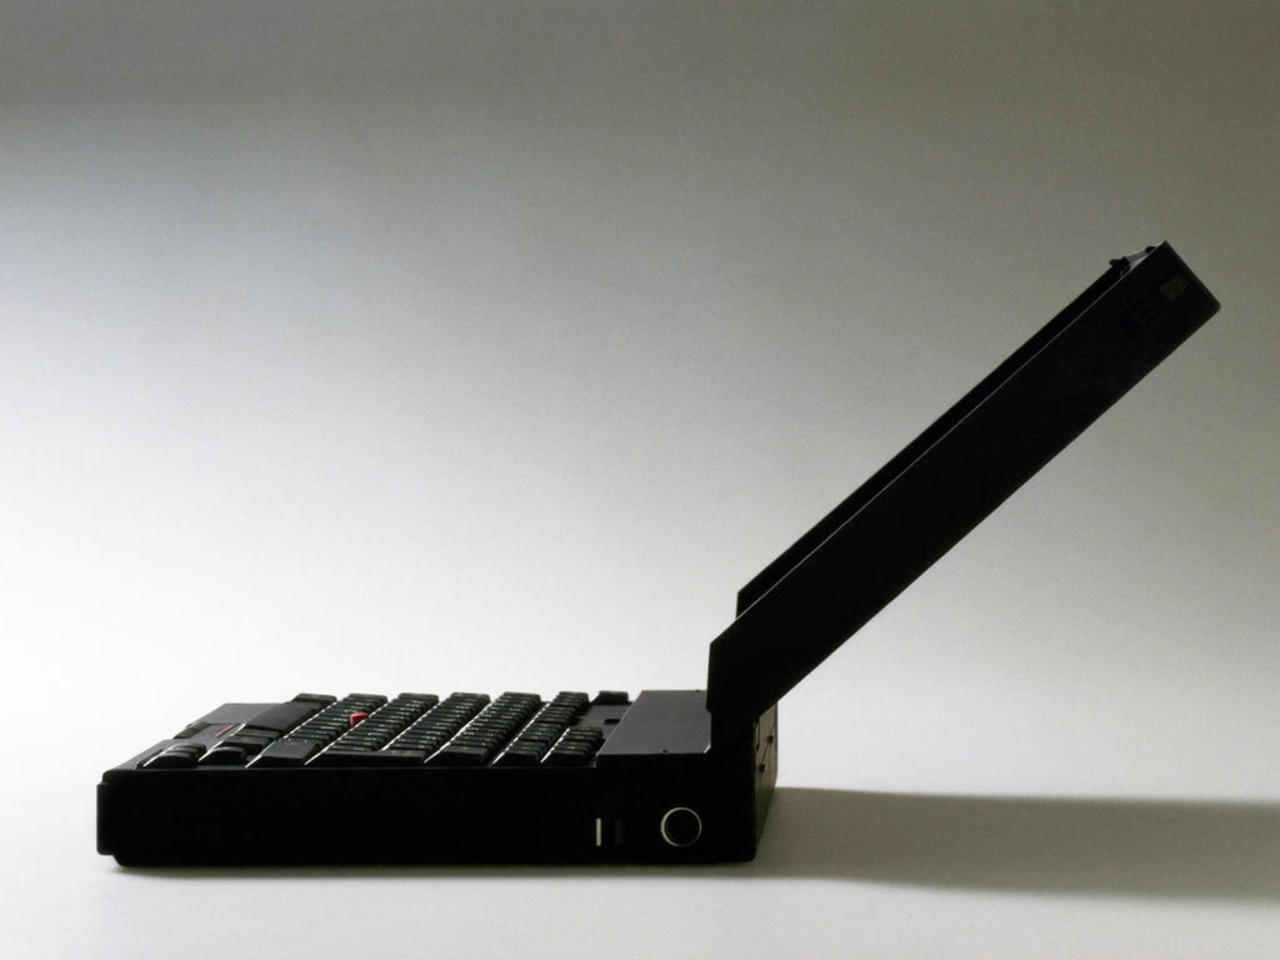 The Complete History of the ThinkPad: Launch, Models, Pricing, and